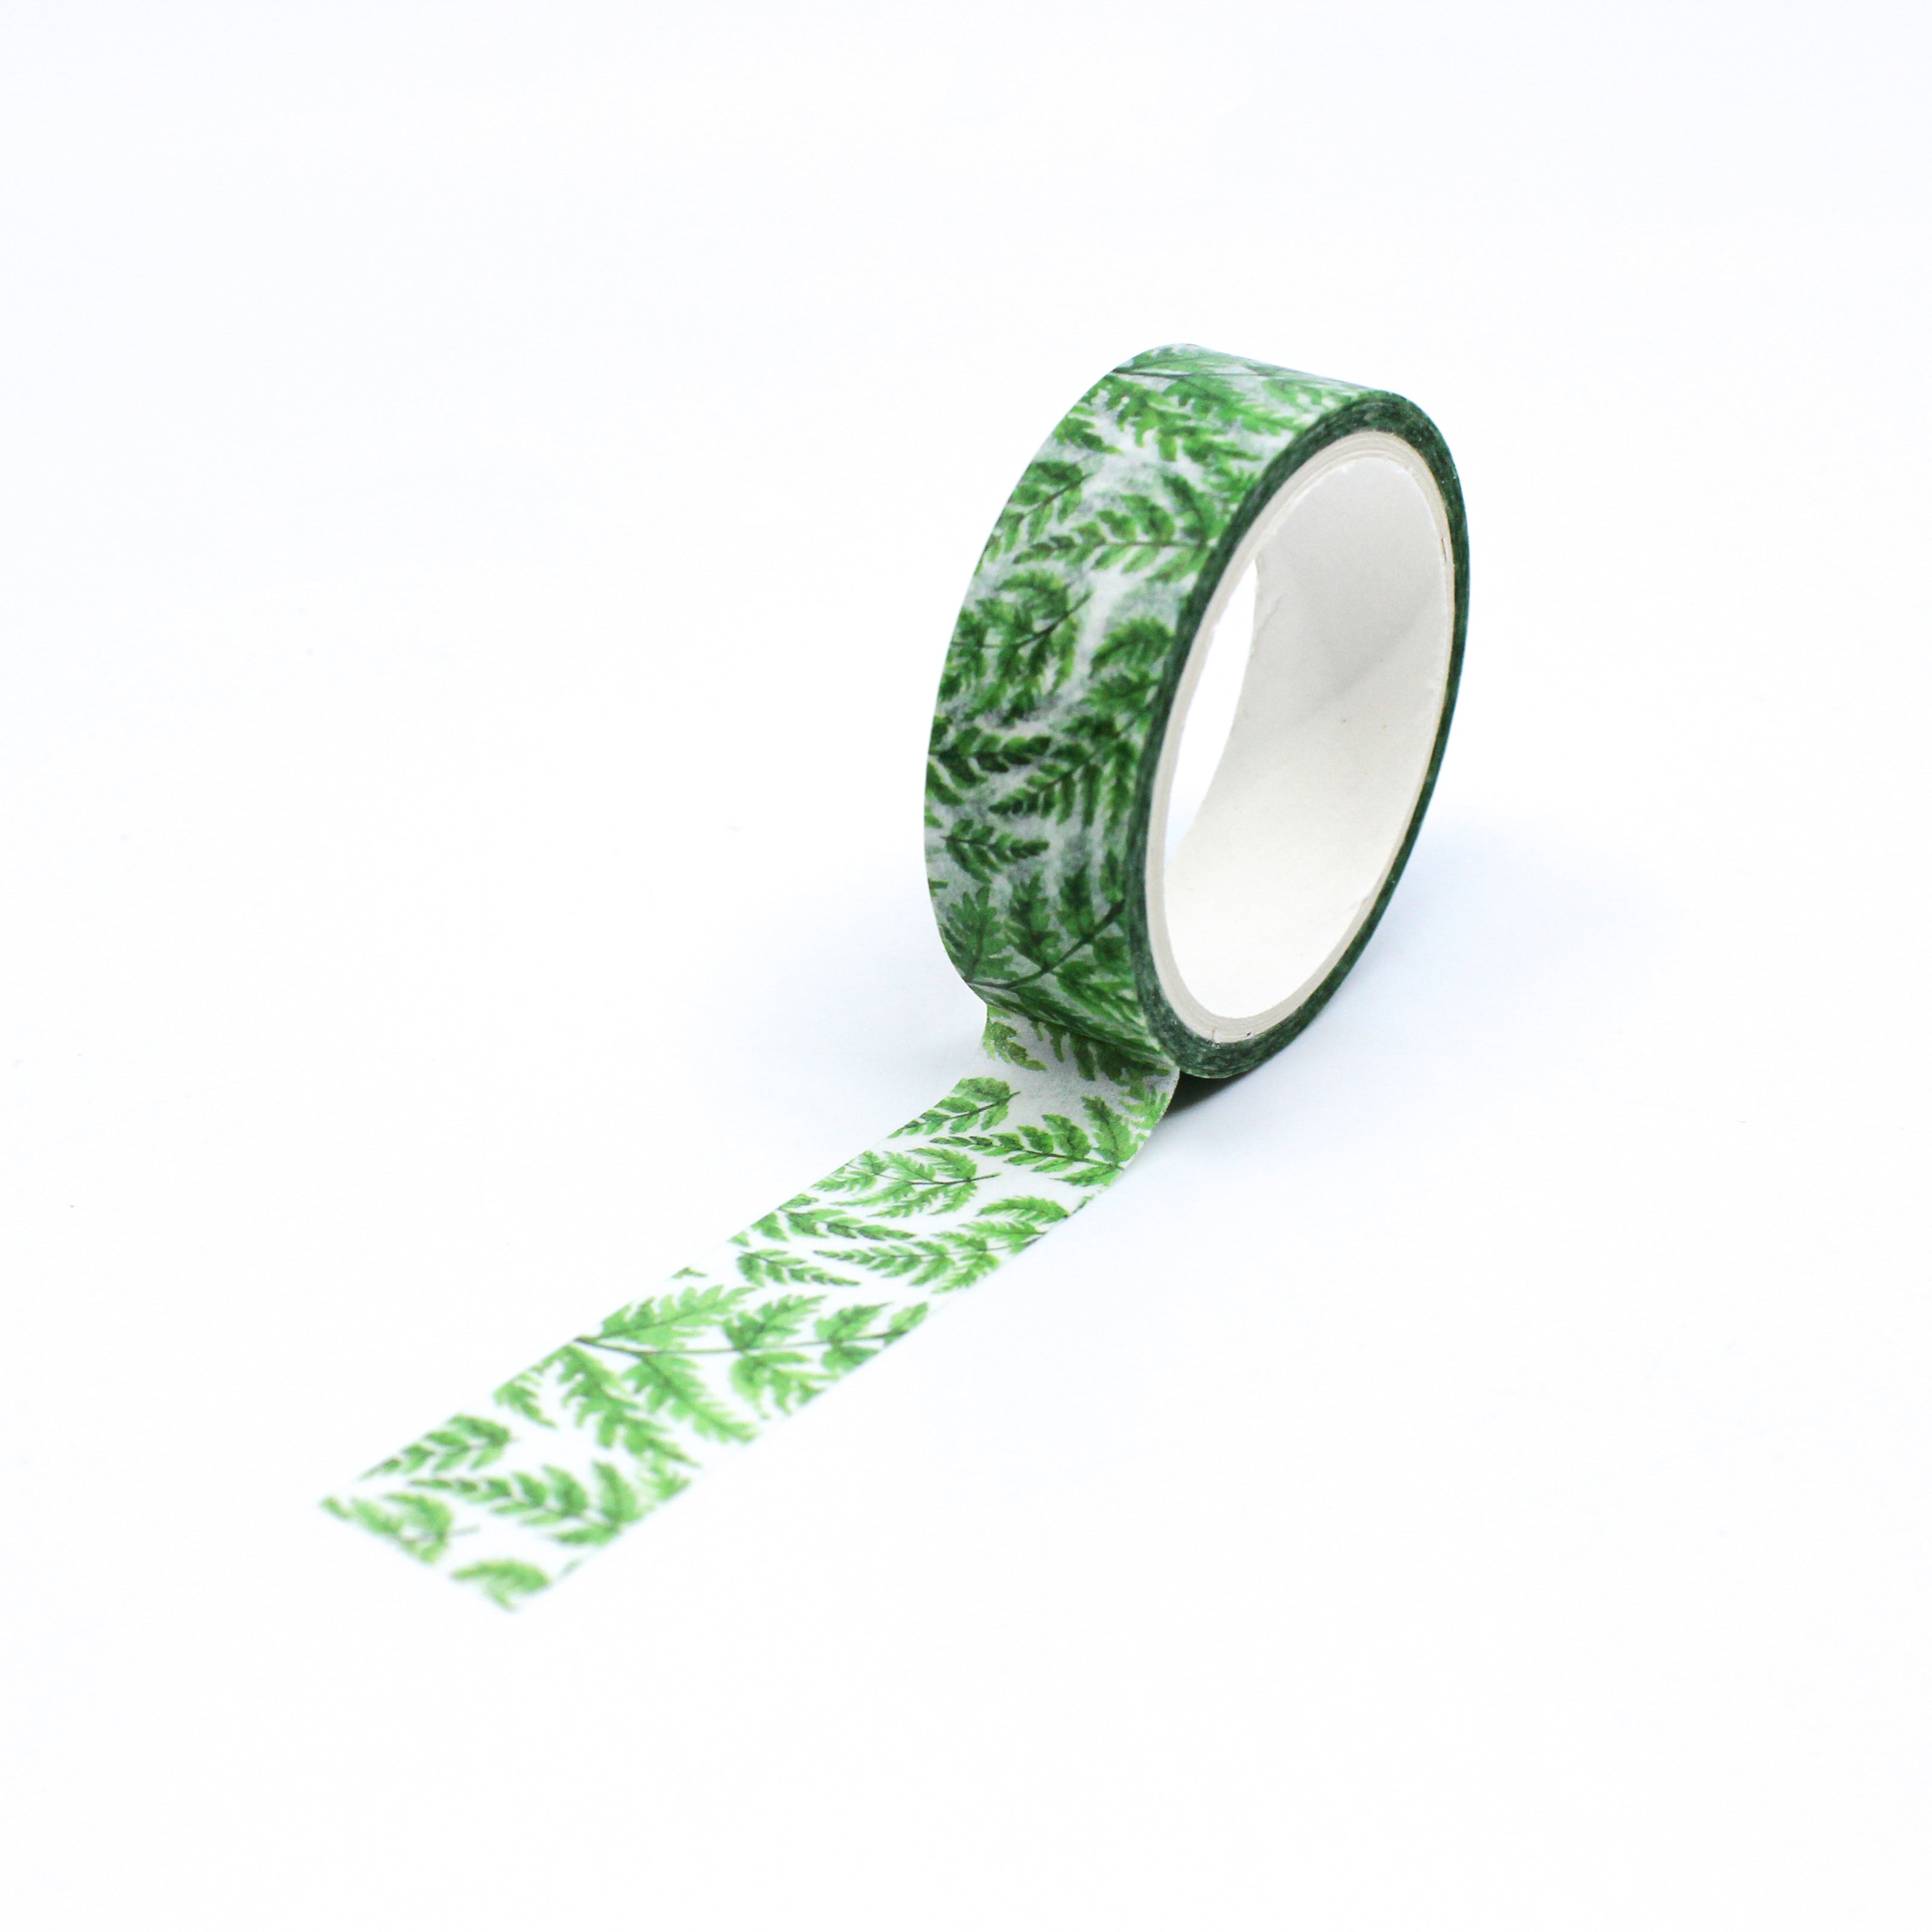 This a full pattern repeat view of green fern leaves washi tape from BBB Supplies Craft Shop